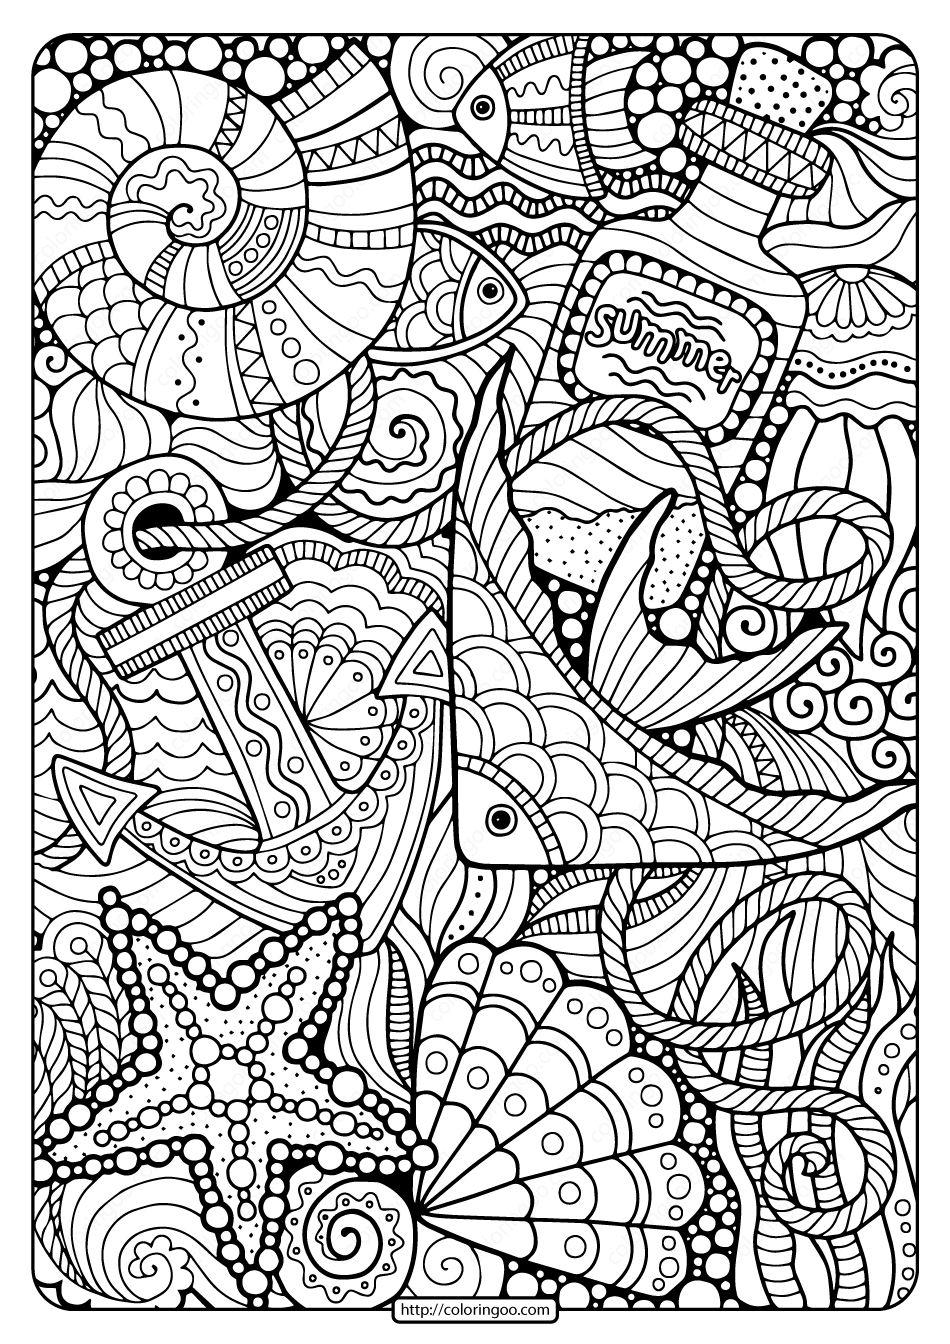 summer coloring pages ice cream | summer picture color ideas | easy to color coloring pages